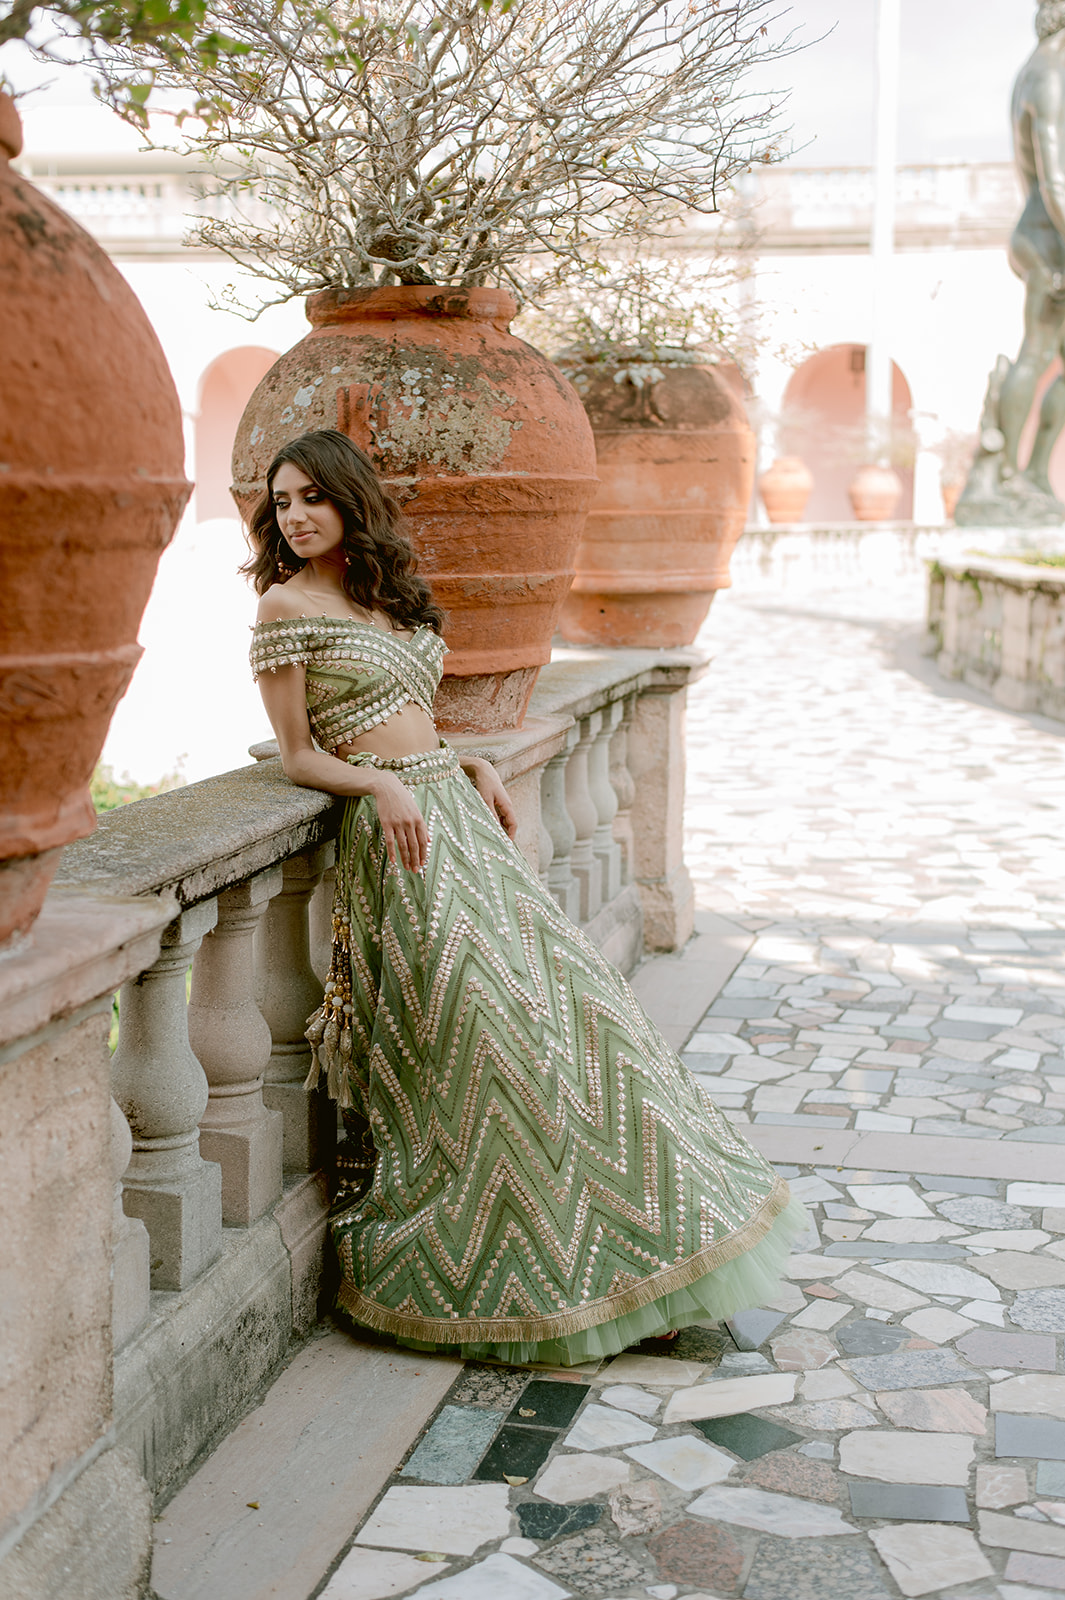 "Romantic Indian engagement session at the John and Mable Ringling Museum's Ca' d'Zan"
